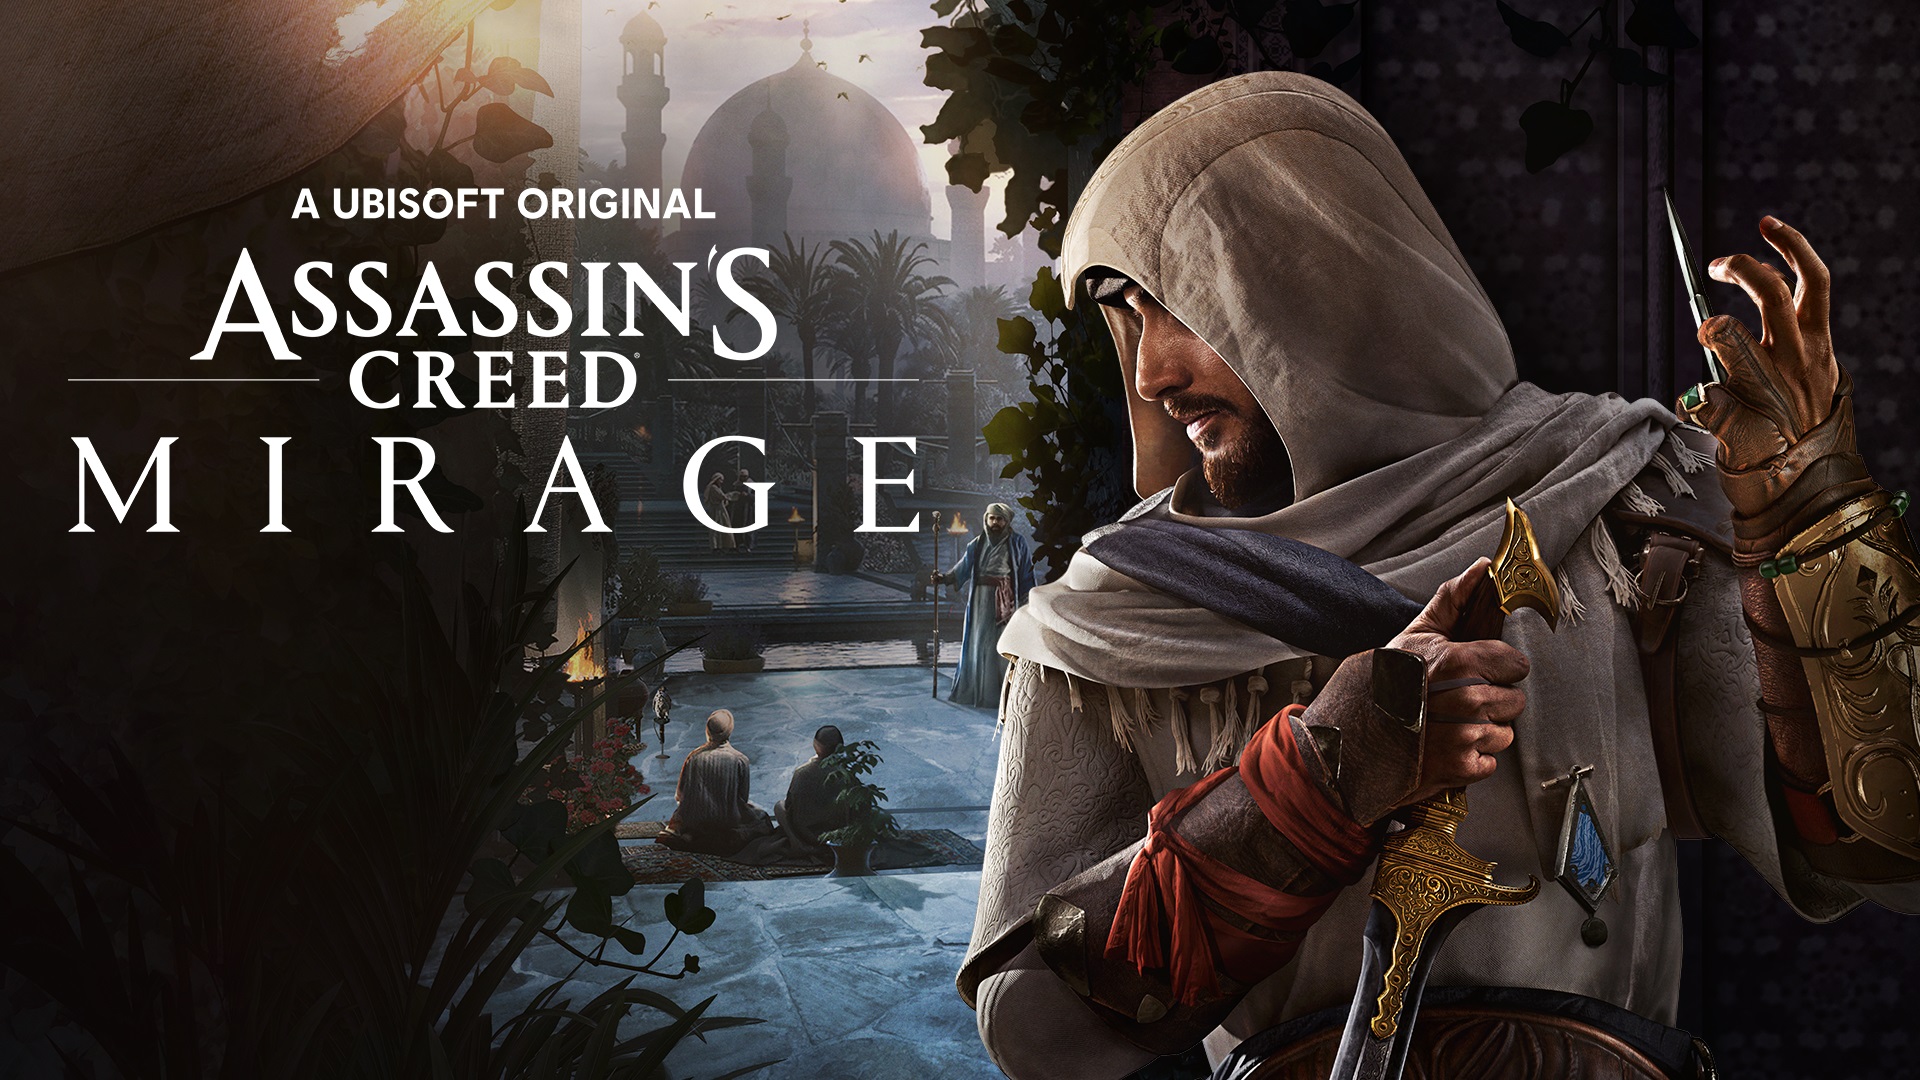 Ubisoft Forward: Assassin’s Creed Mirage returns to the series’ roots